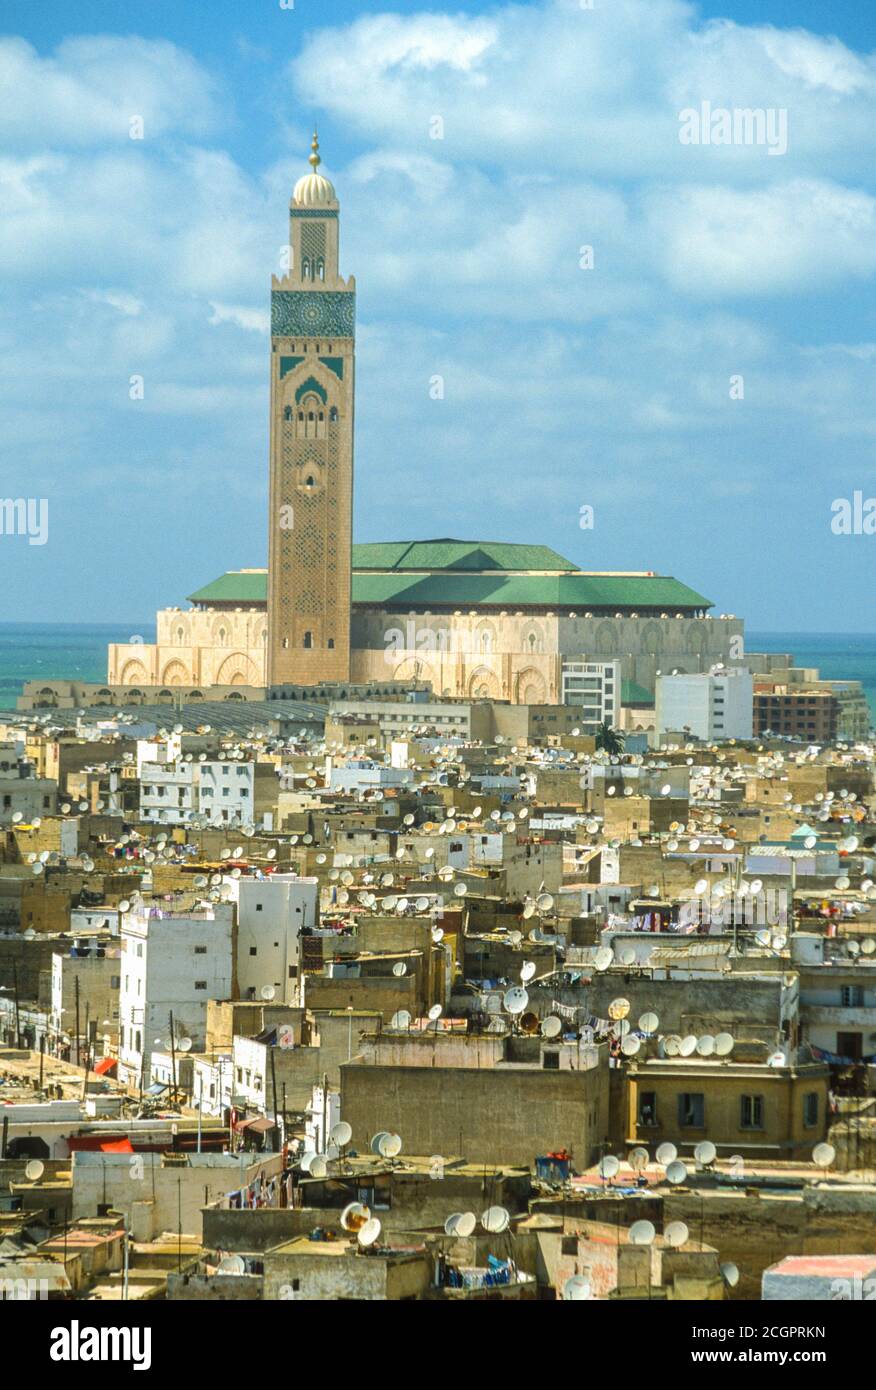 Casablanca, Morocco.   Satellite Dishes Cover the Rooftops in the Medina of Casablanca, Mosque of Hassan II in Background. Photographed April 2003. Stock Photo